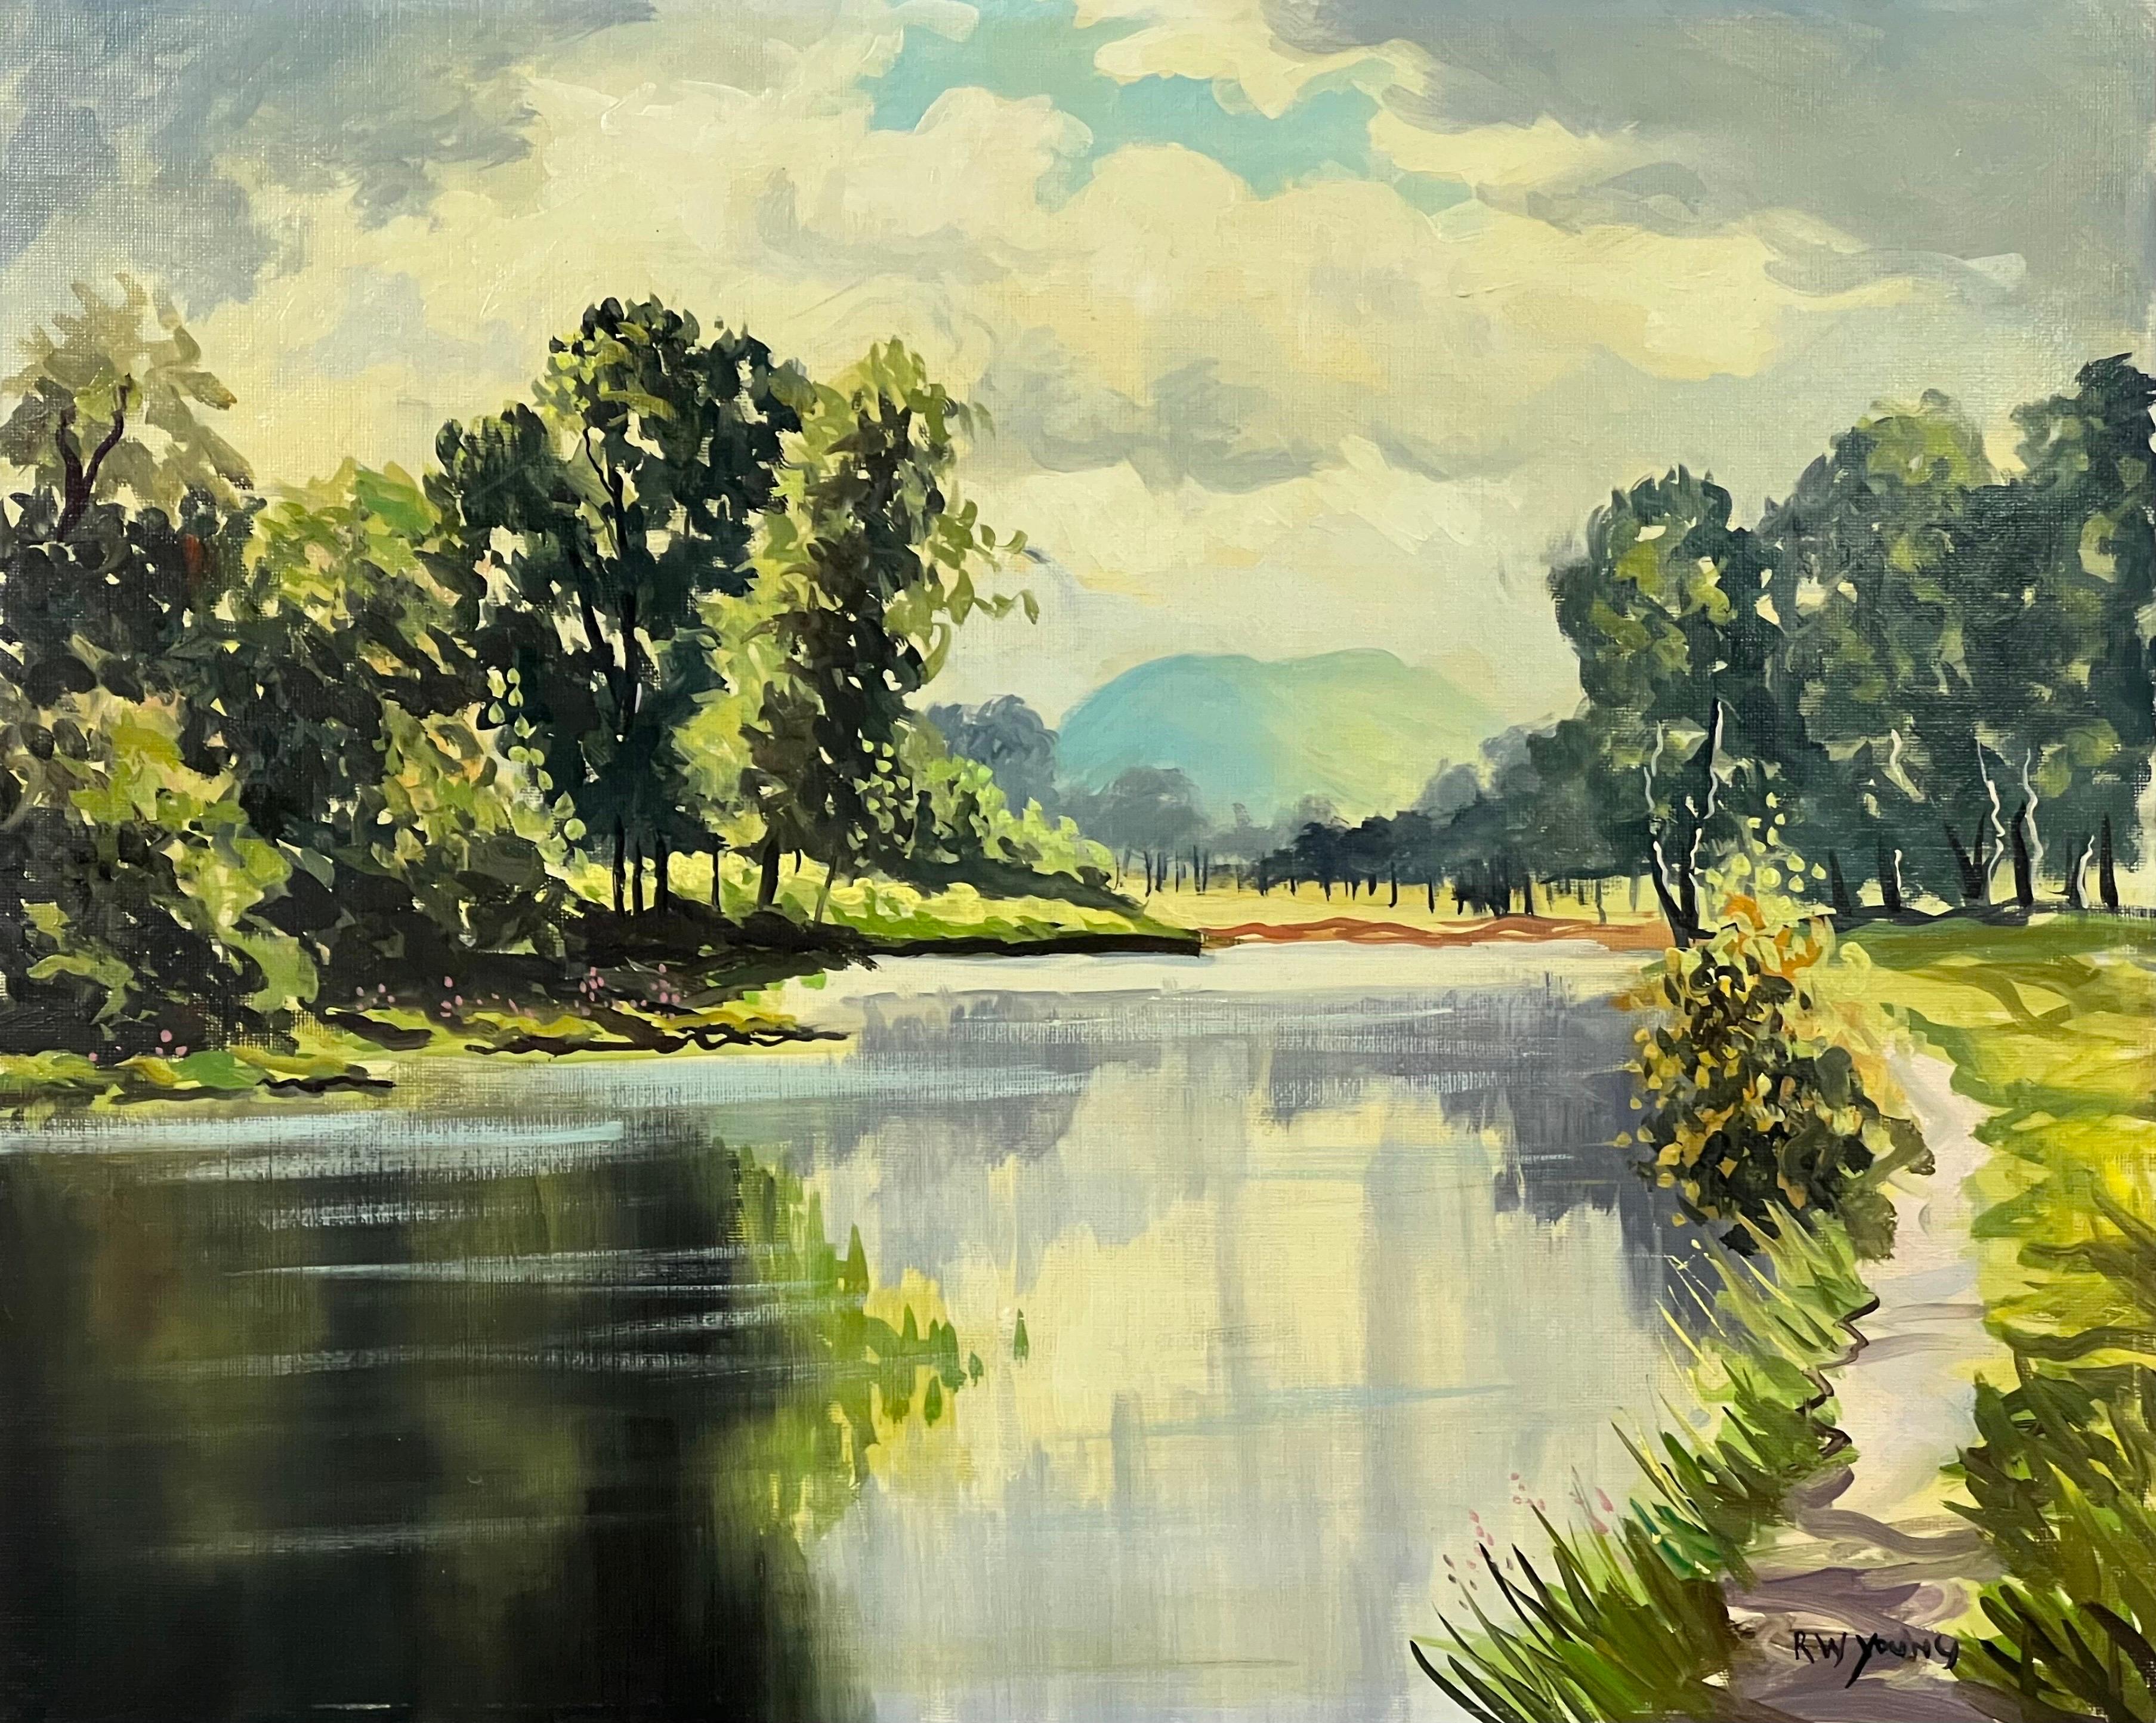 Robert W Young  Landscape Art - Lush Green River Landscape with Blue Sky in County Antrim Northern Ireland